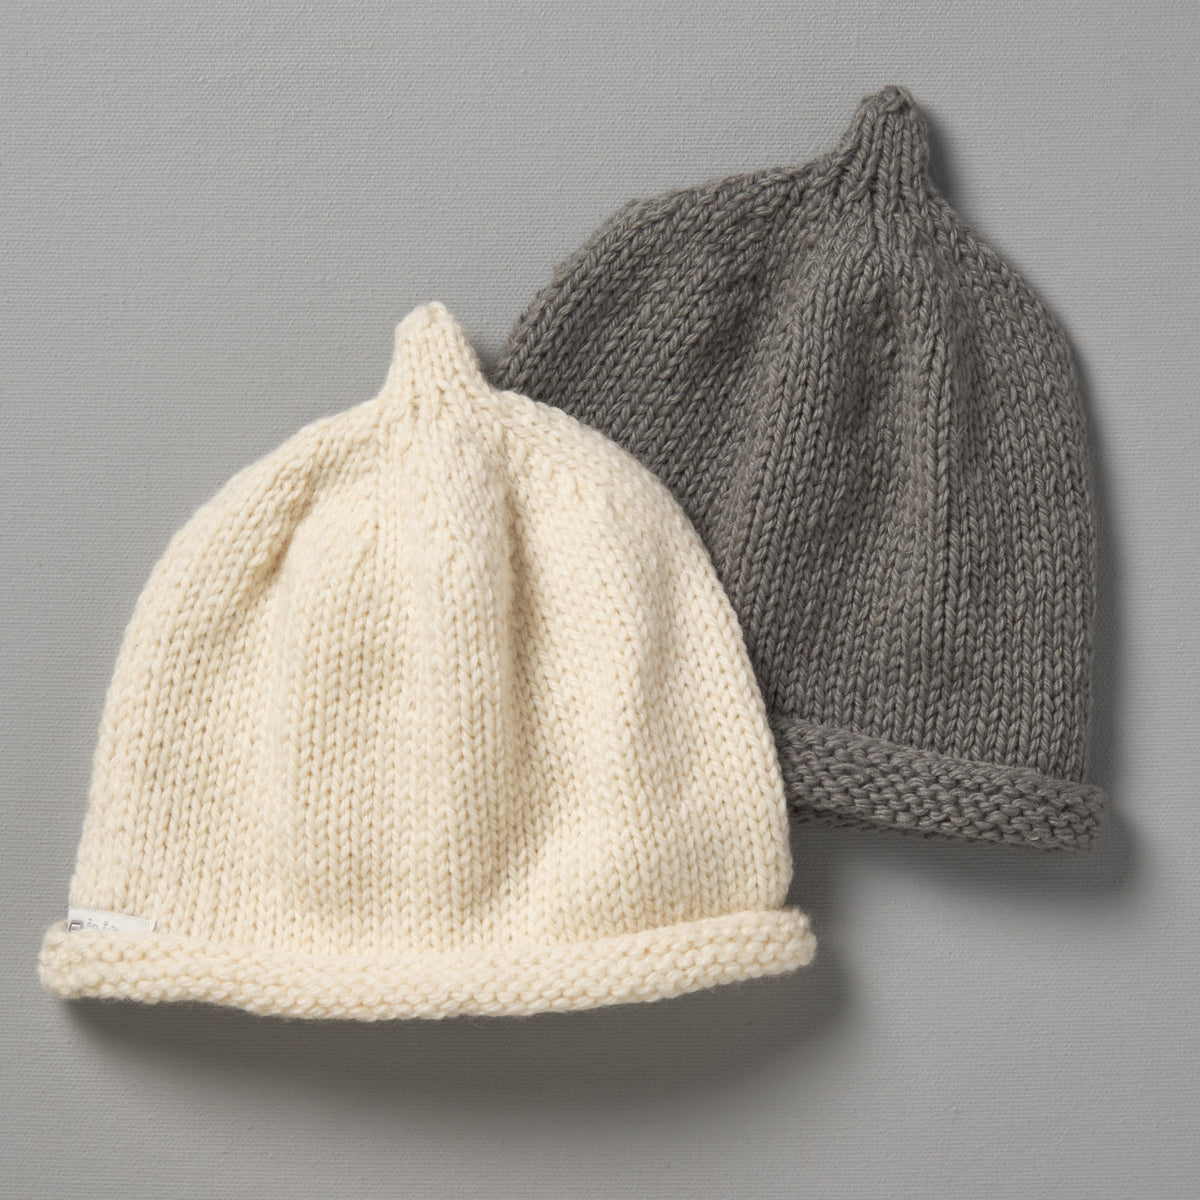 Two Hand Knitted Baby Beanies - Mushroom by Weebits on a grey surface.